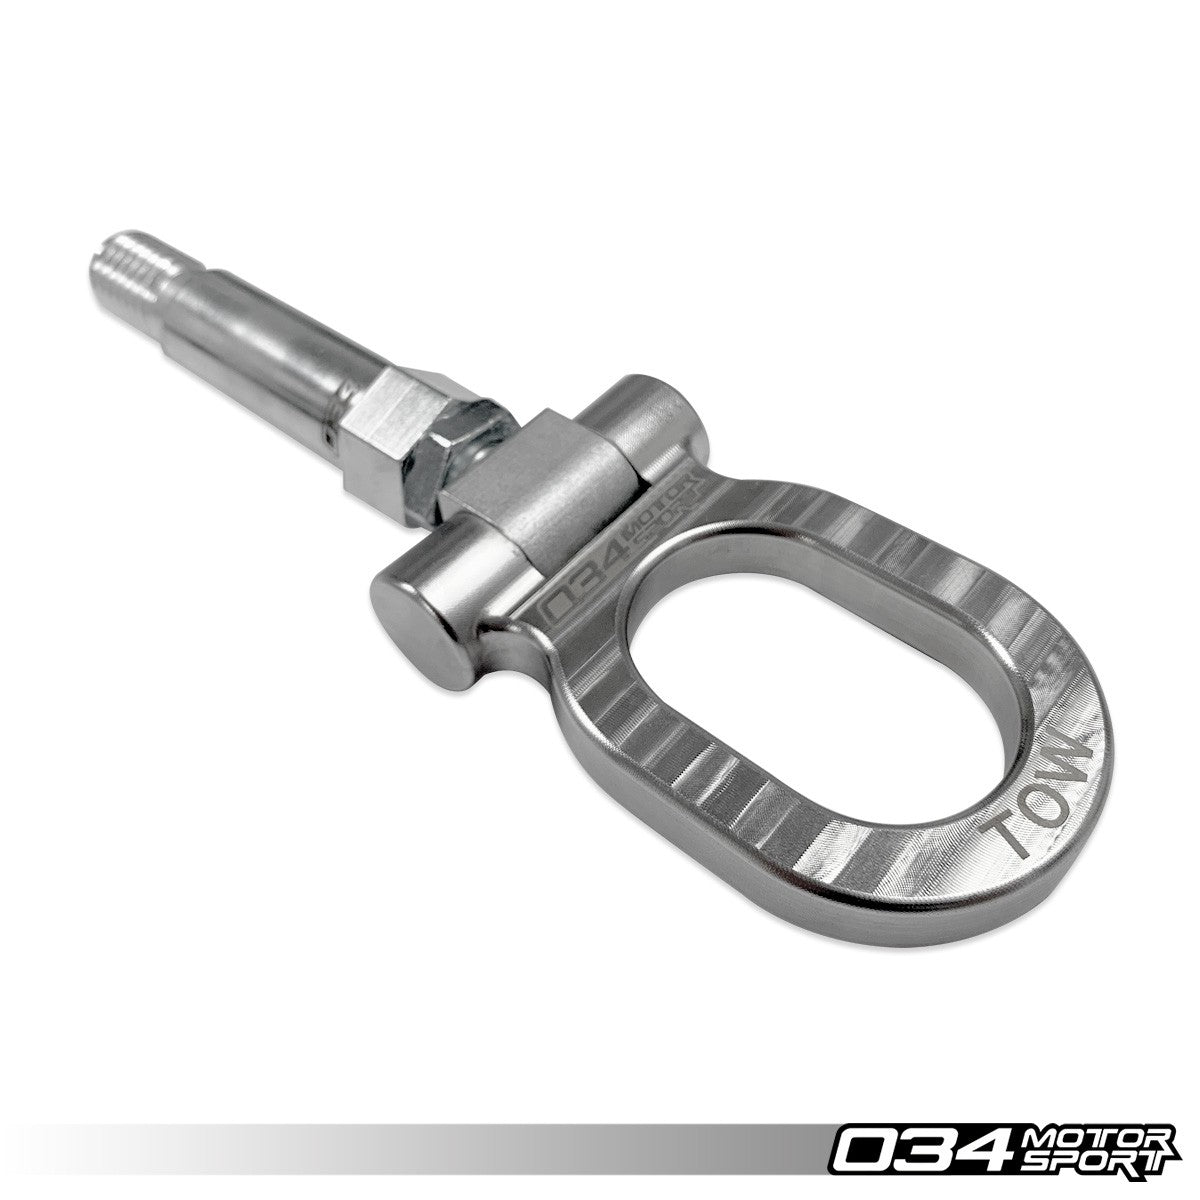 MOTORSPORT STAINLESS STEEL TOW HOOK - 105MM FOR AUDI MQB/B8/B8.5